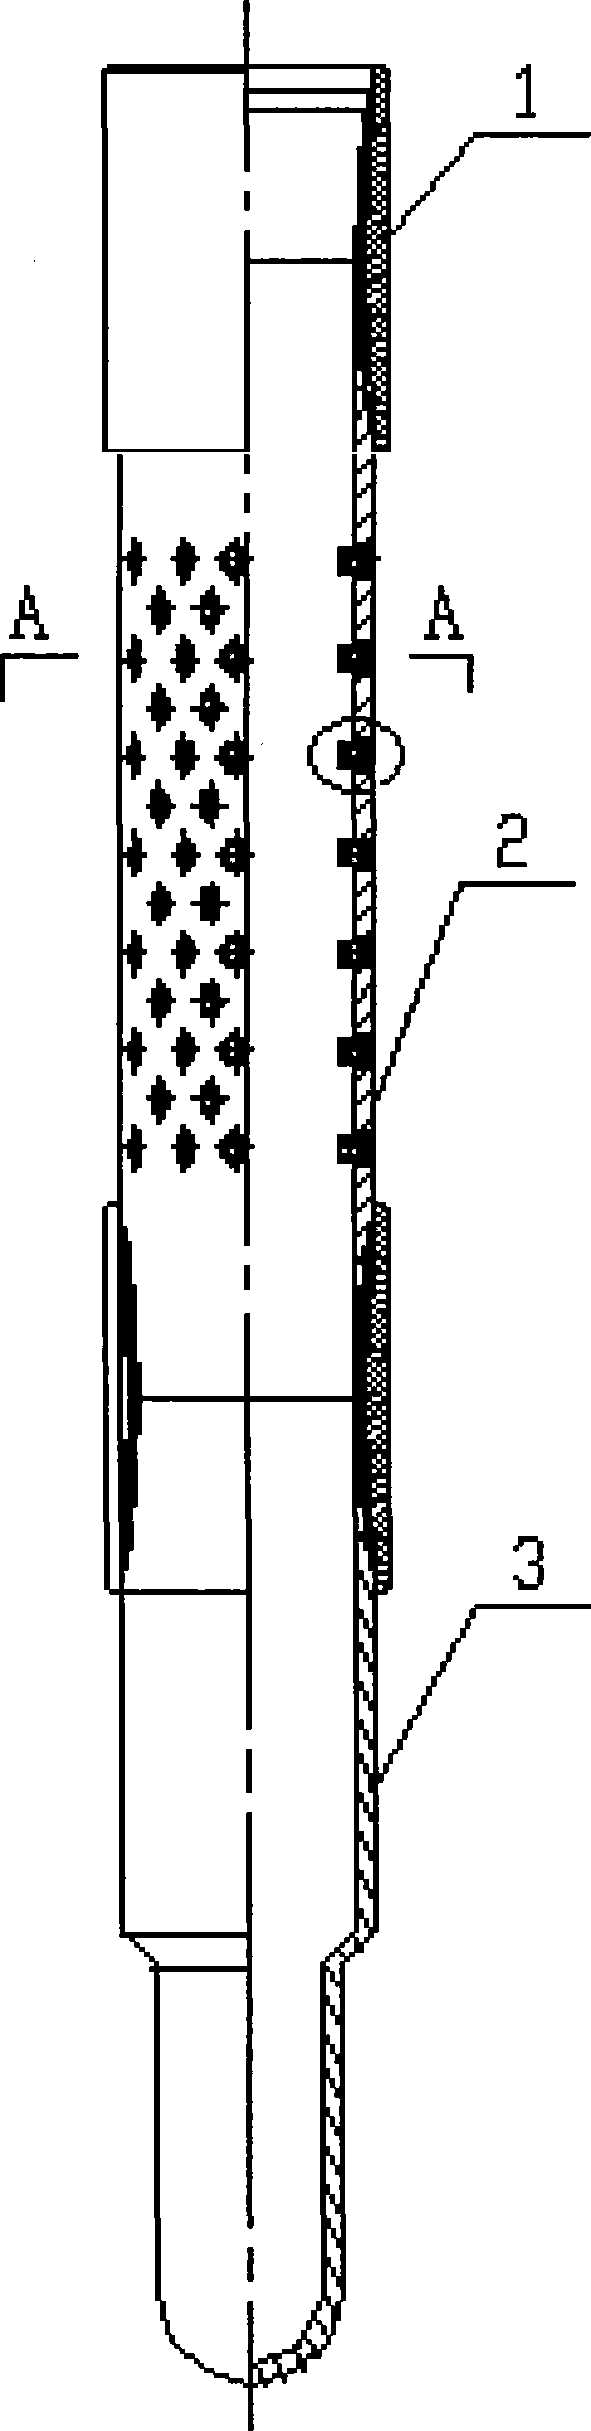 Sieve tube well completion method under insufficient balance condition and temporary blocking type sieve tube